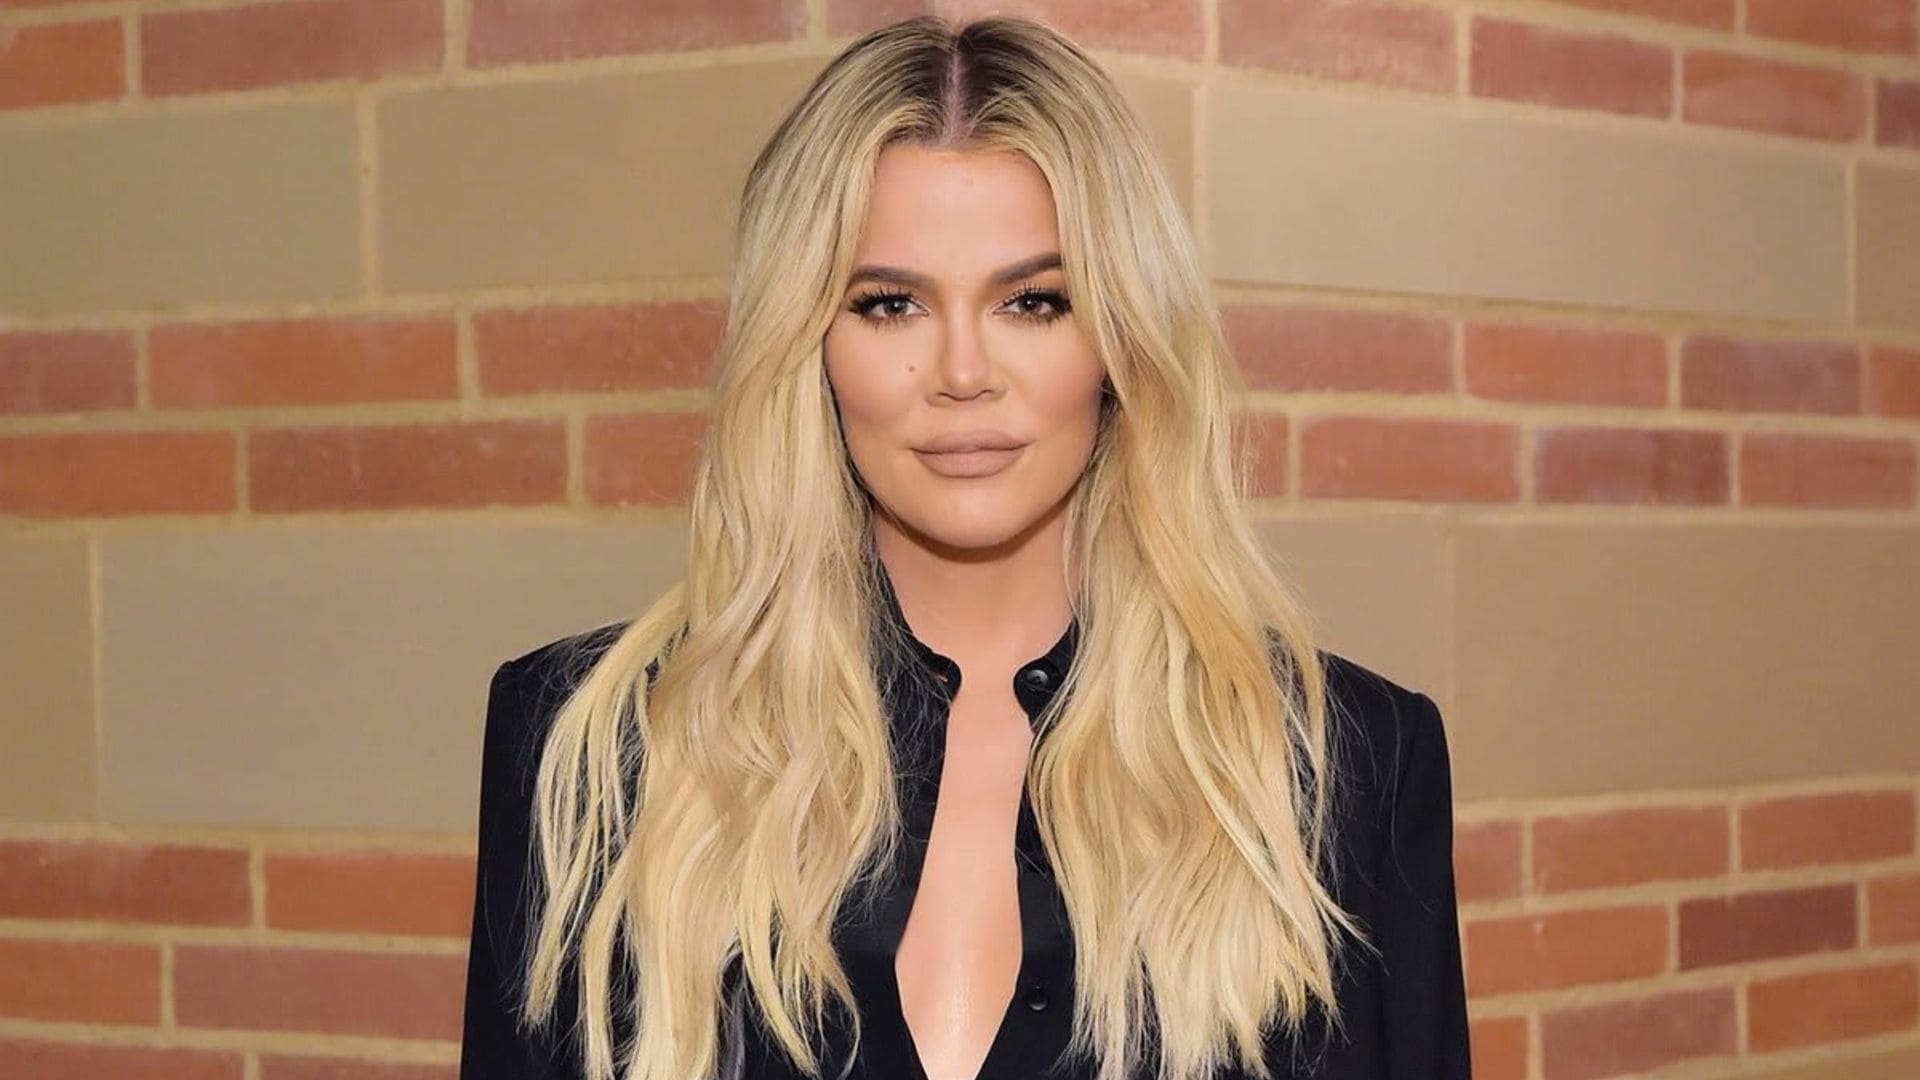 People think Khloe Kardashian altered her look again in her recent Instagram stories